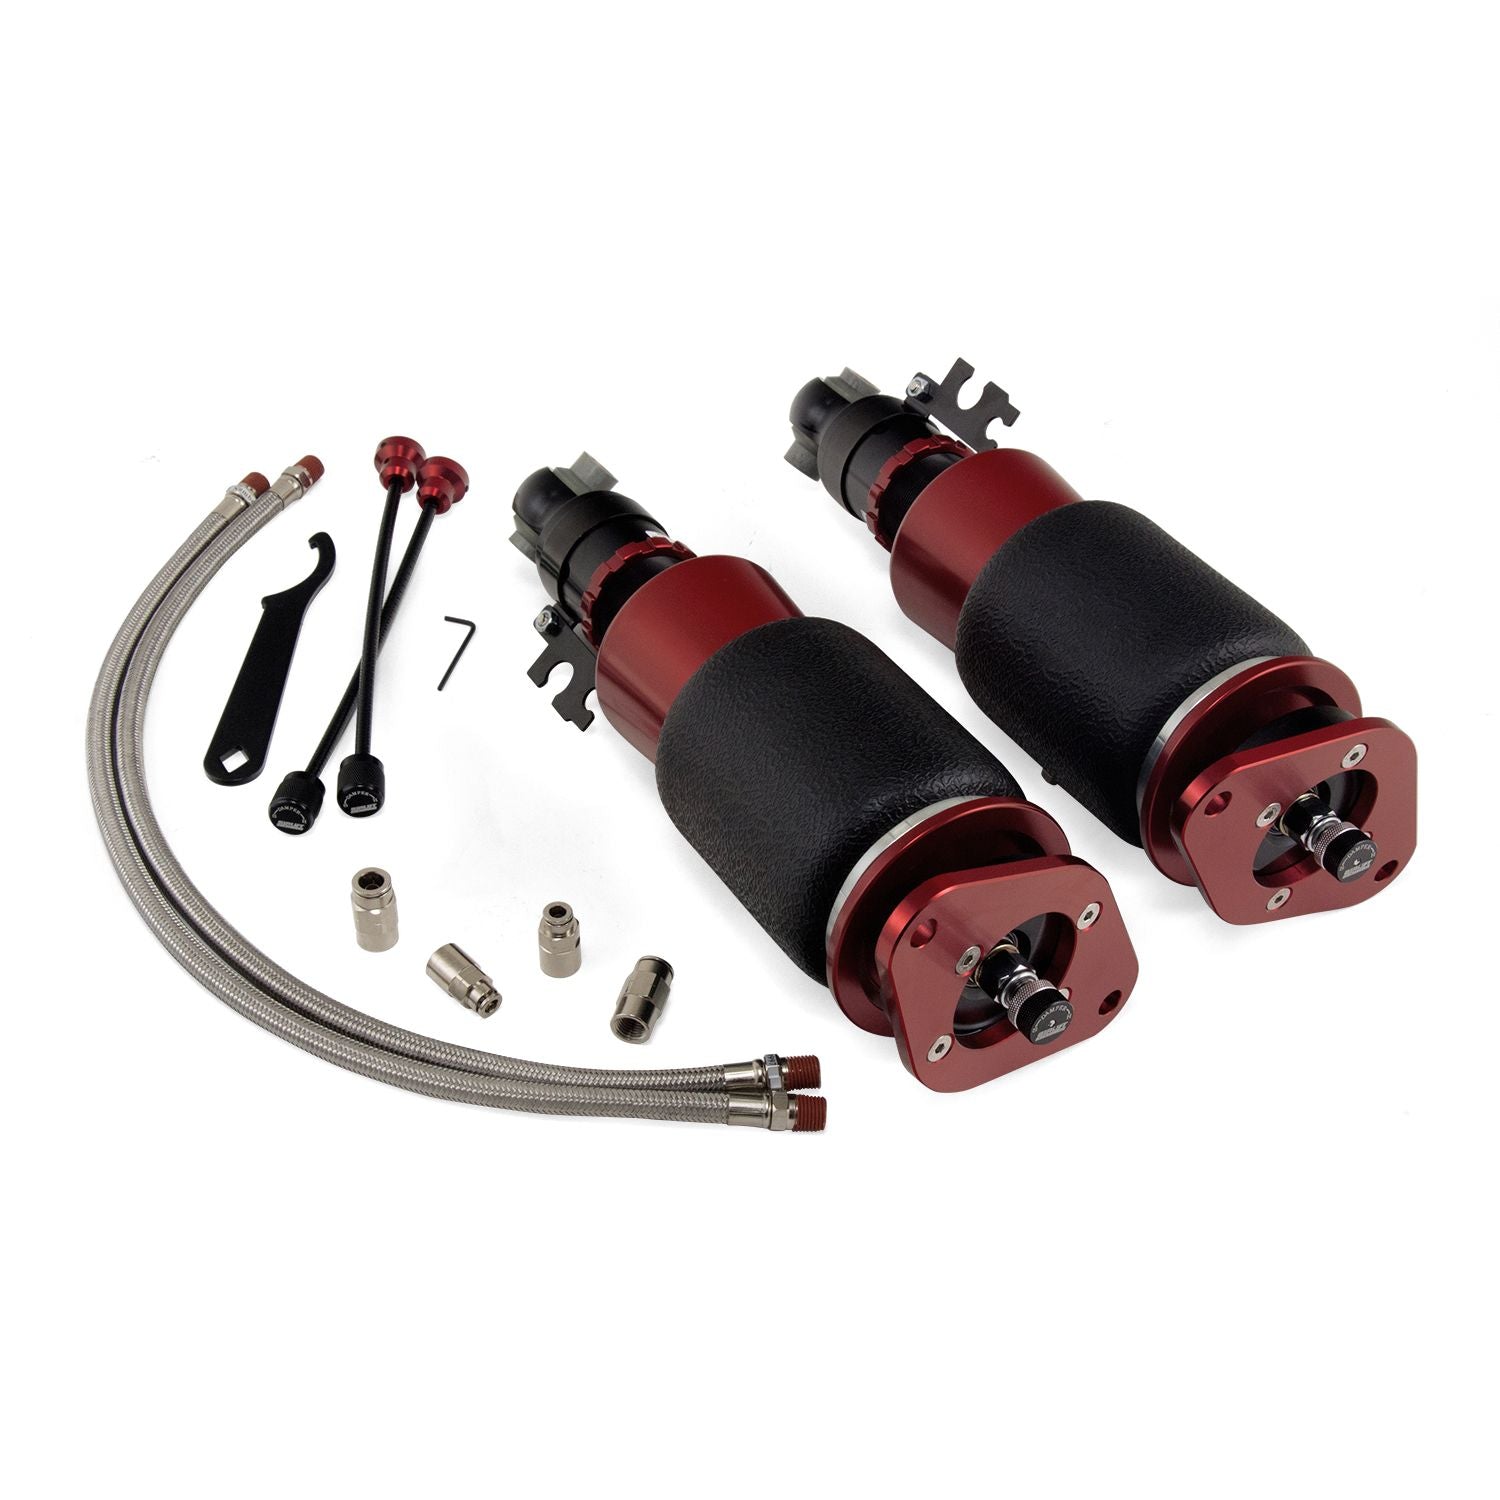 Air Lift Performance air suspension gives you maximum drop with superior handling and a comfortable ride. With a huge range of damping adjustment and lightweight components Air Lift Performance is a no-brainer for your Mini.